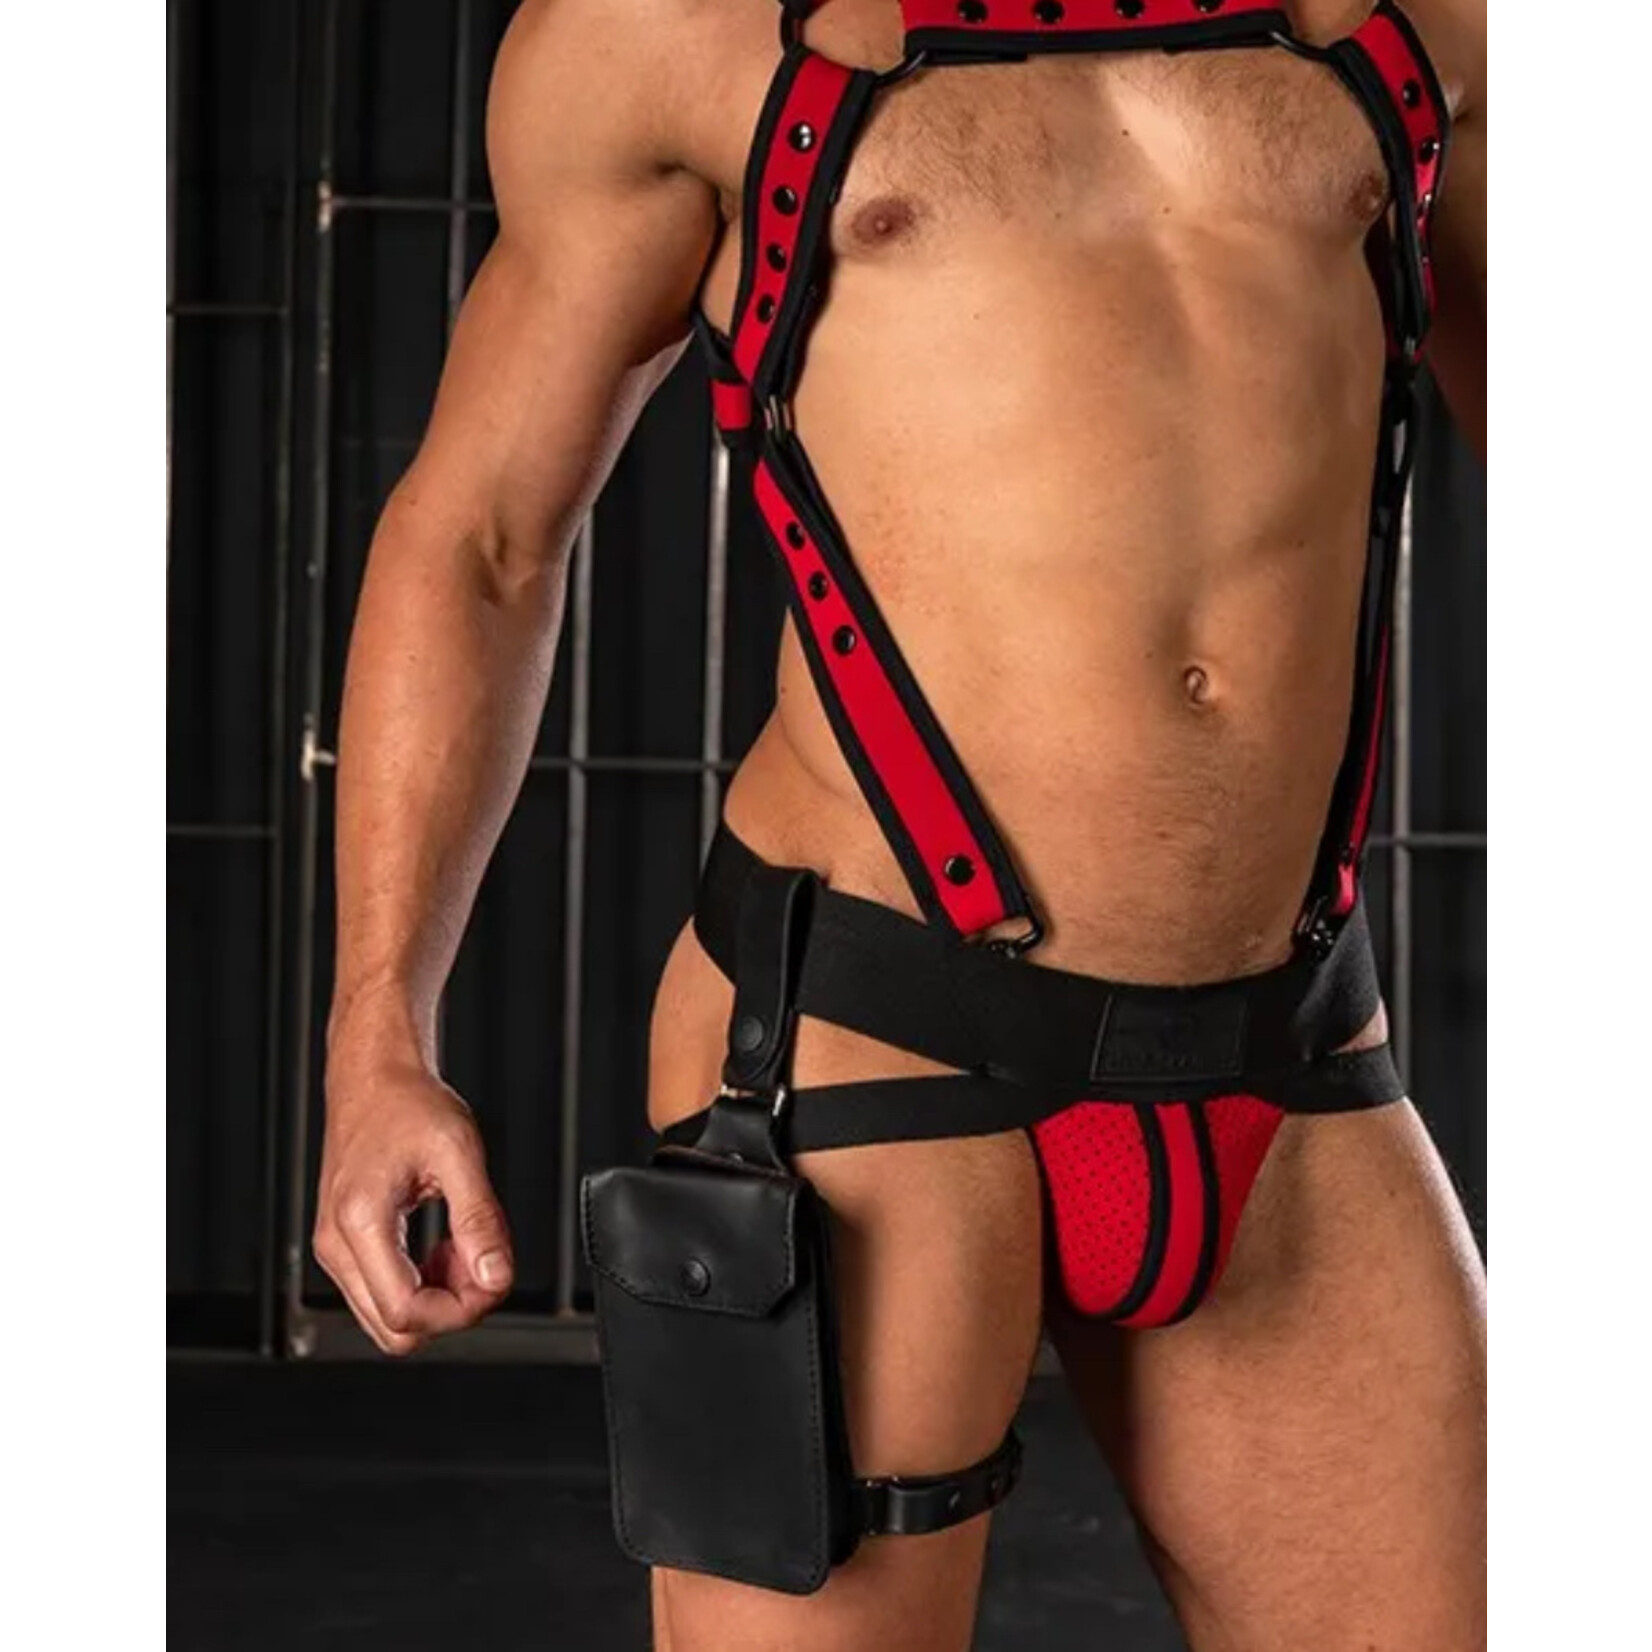 Mr. S Leather Mr. S Leather - Leather Jockstrap Holster Harness - Black - One Size